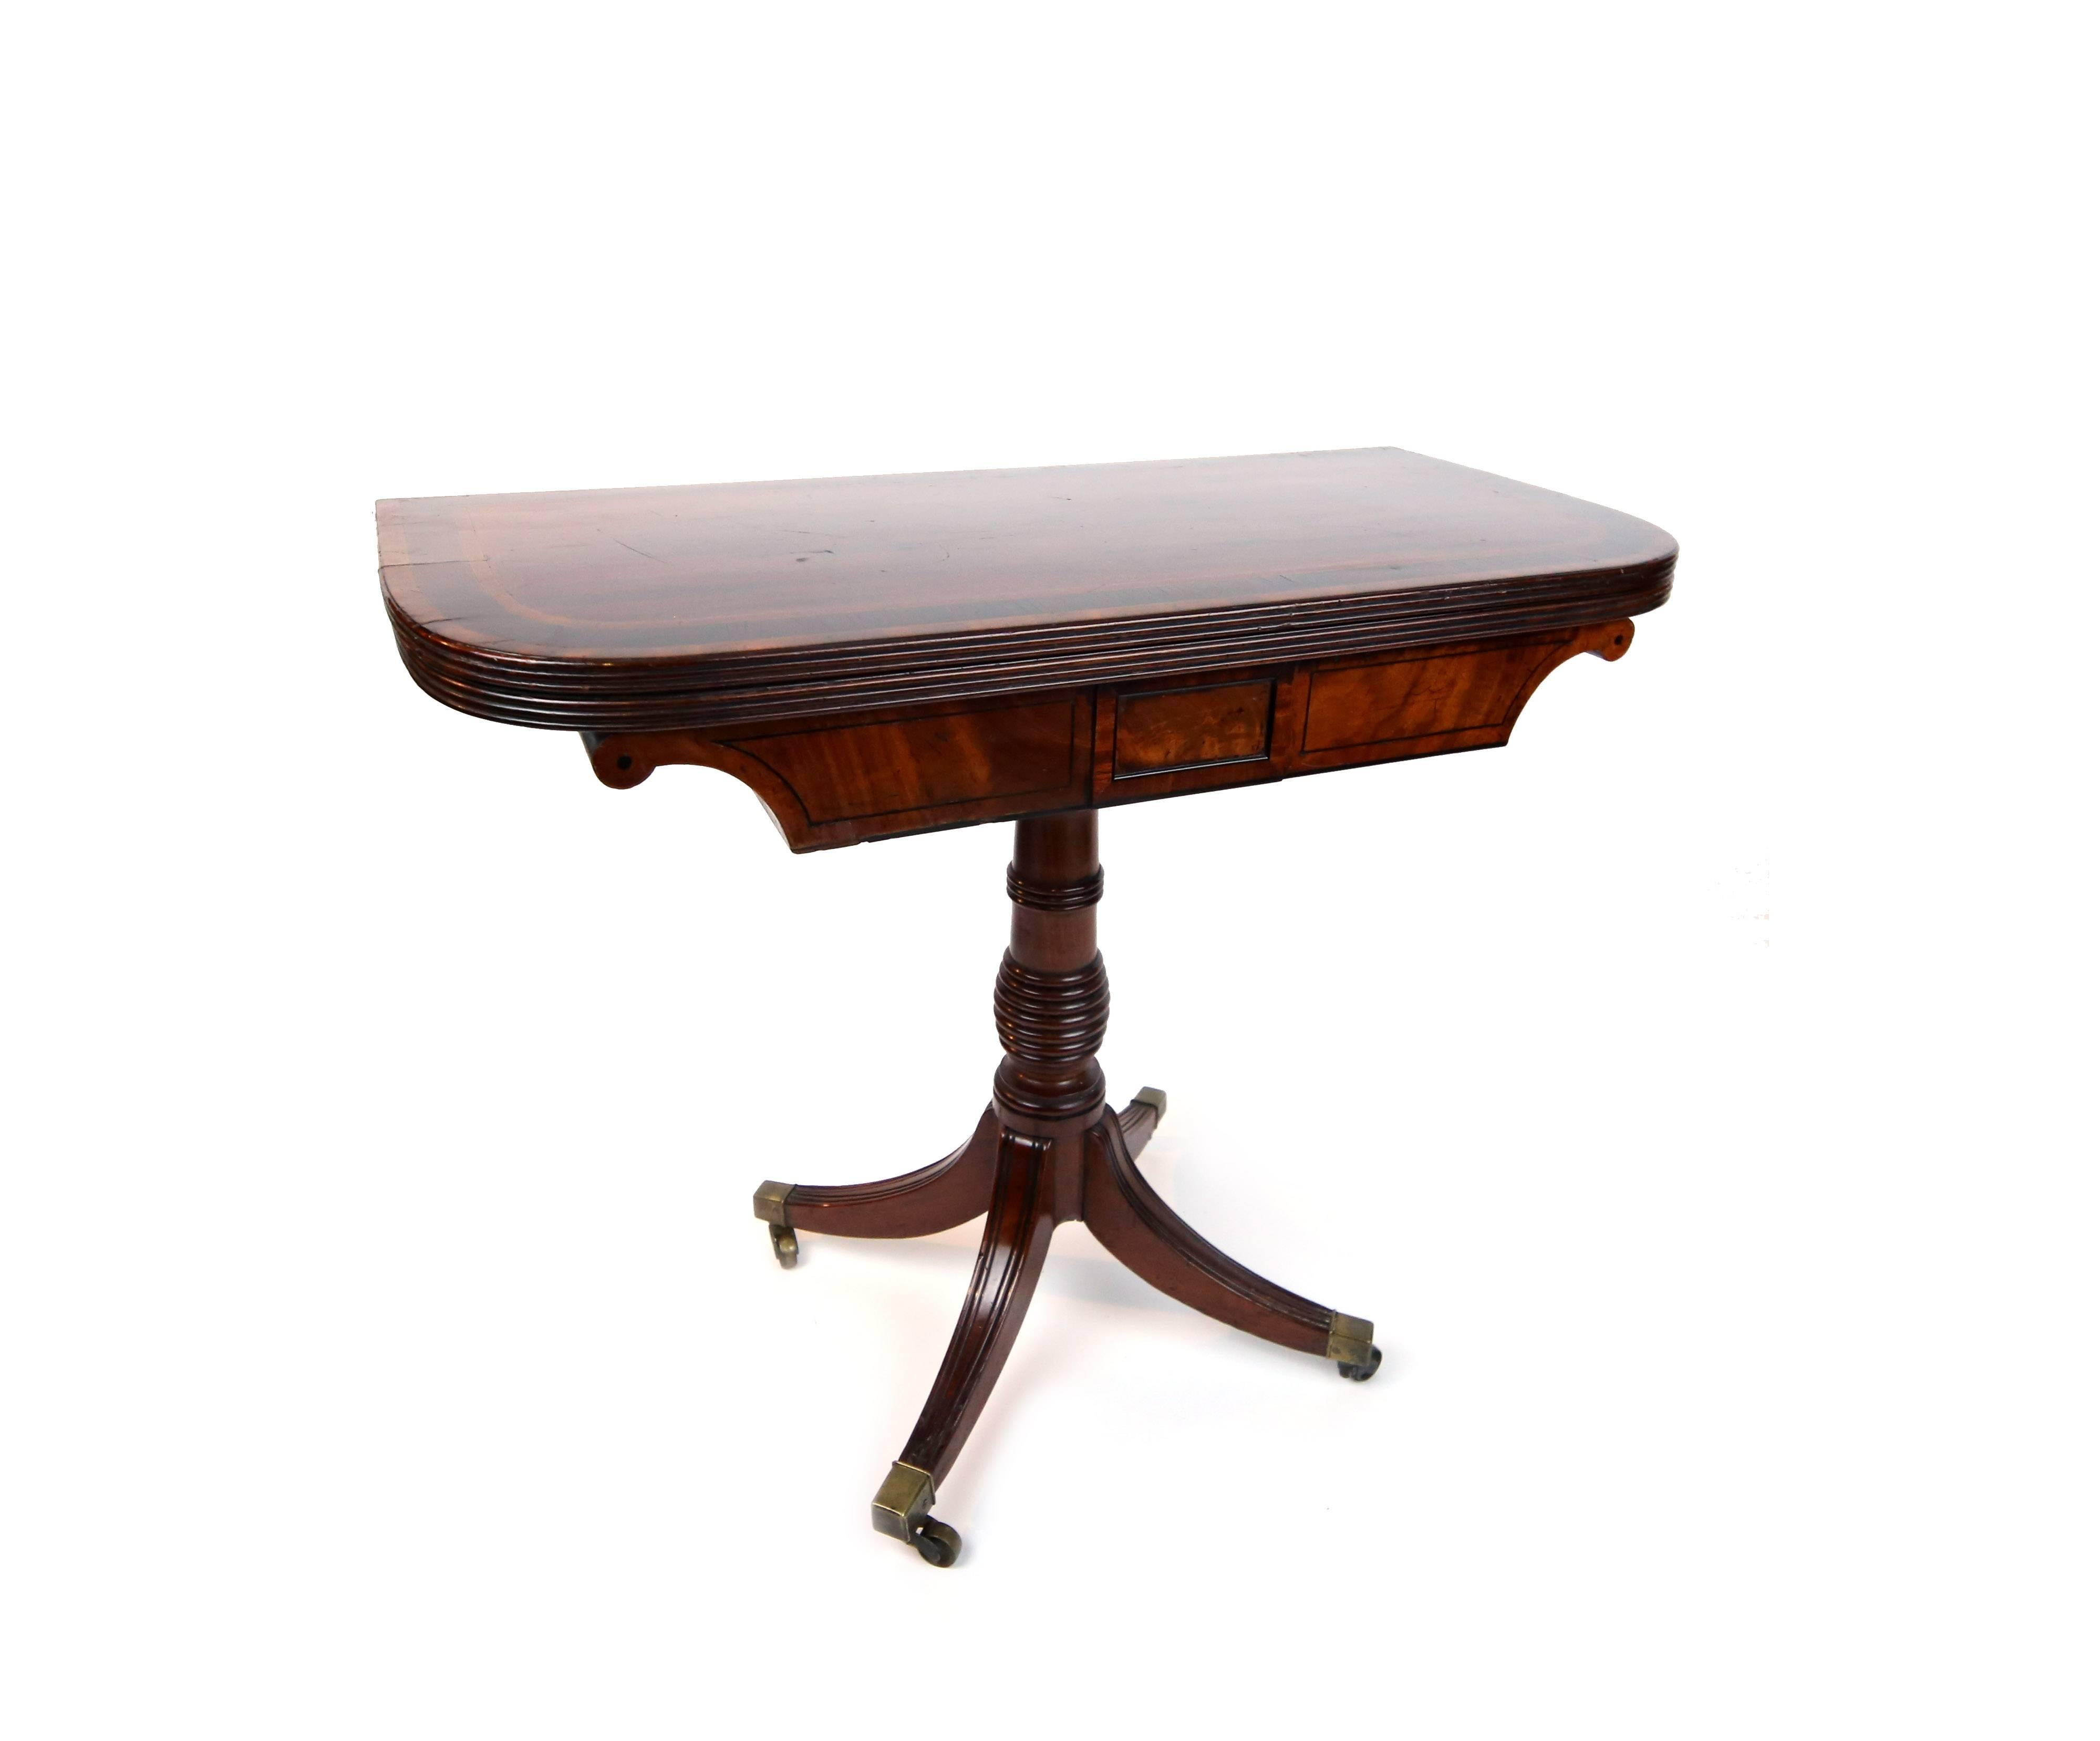 Early 19th Century William IV Card Table with Ebony Inlay and Turned Pedestal In Good Condition For Sale In Brooklyn, NY